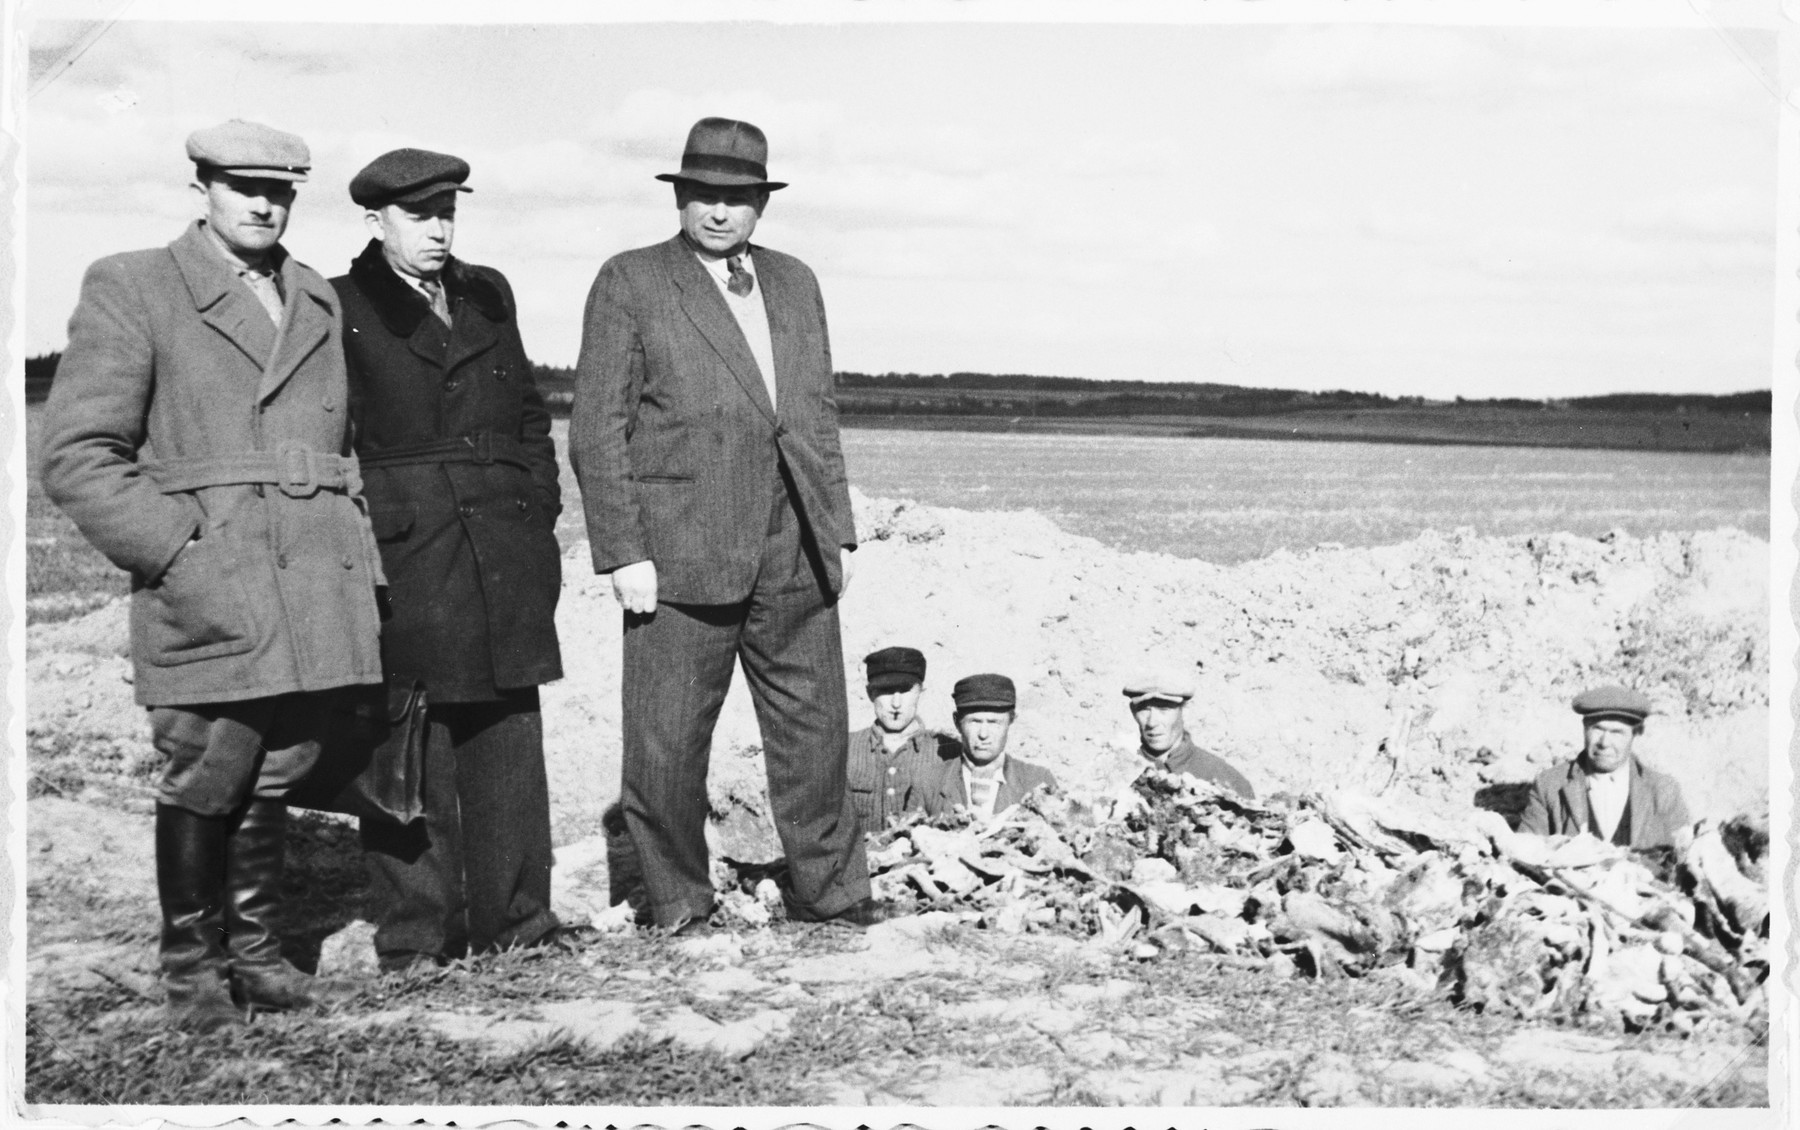 Jewish survivors and Polish workers exhume the bodies of Jews killed during the liquidation of Siemiatycze so that they can be properly reburied at the entrance to the Jewish cemetery.

Yehoshua Kejles is standing at the right.  His father, Efraim Kejles, was among those murdered.